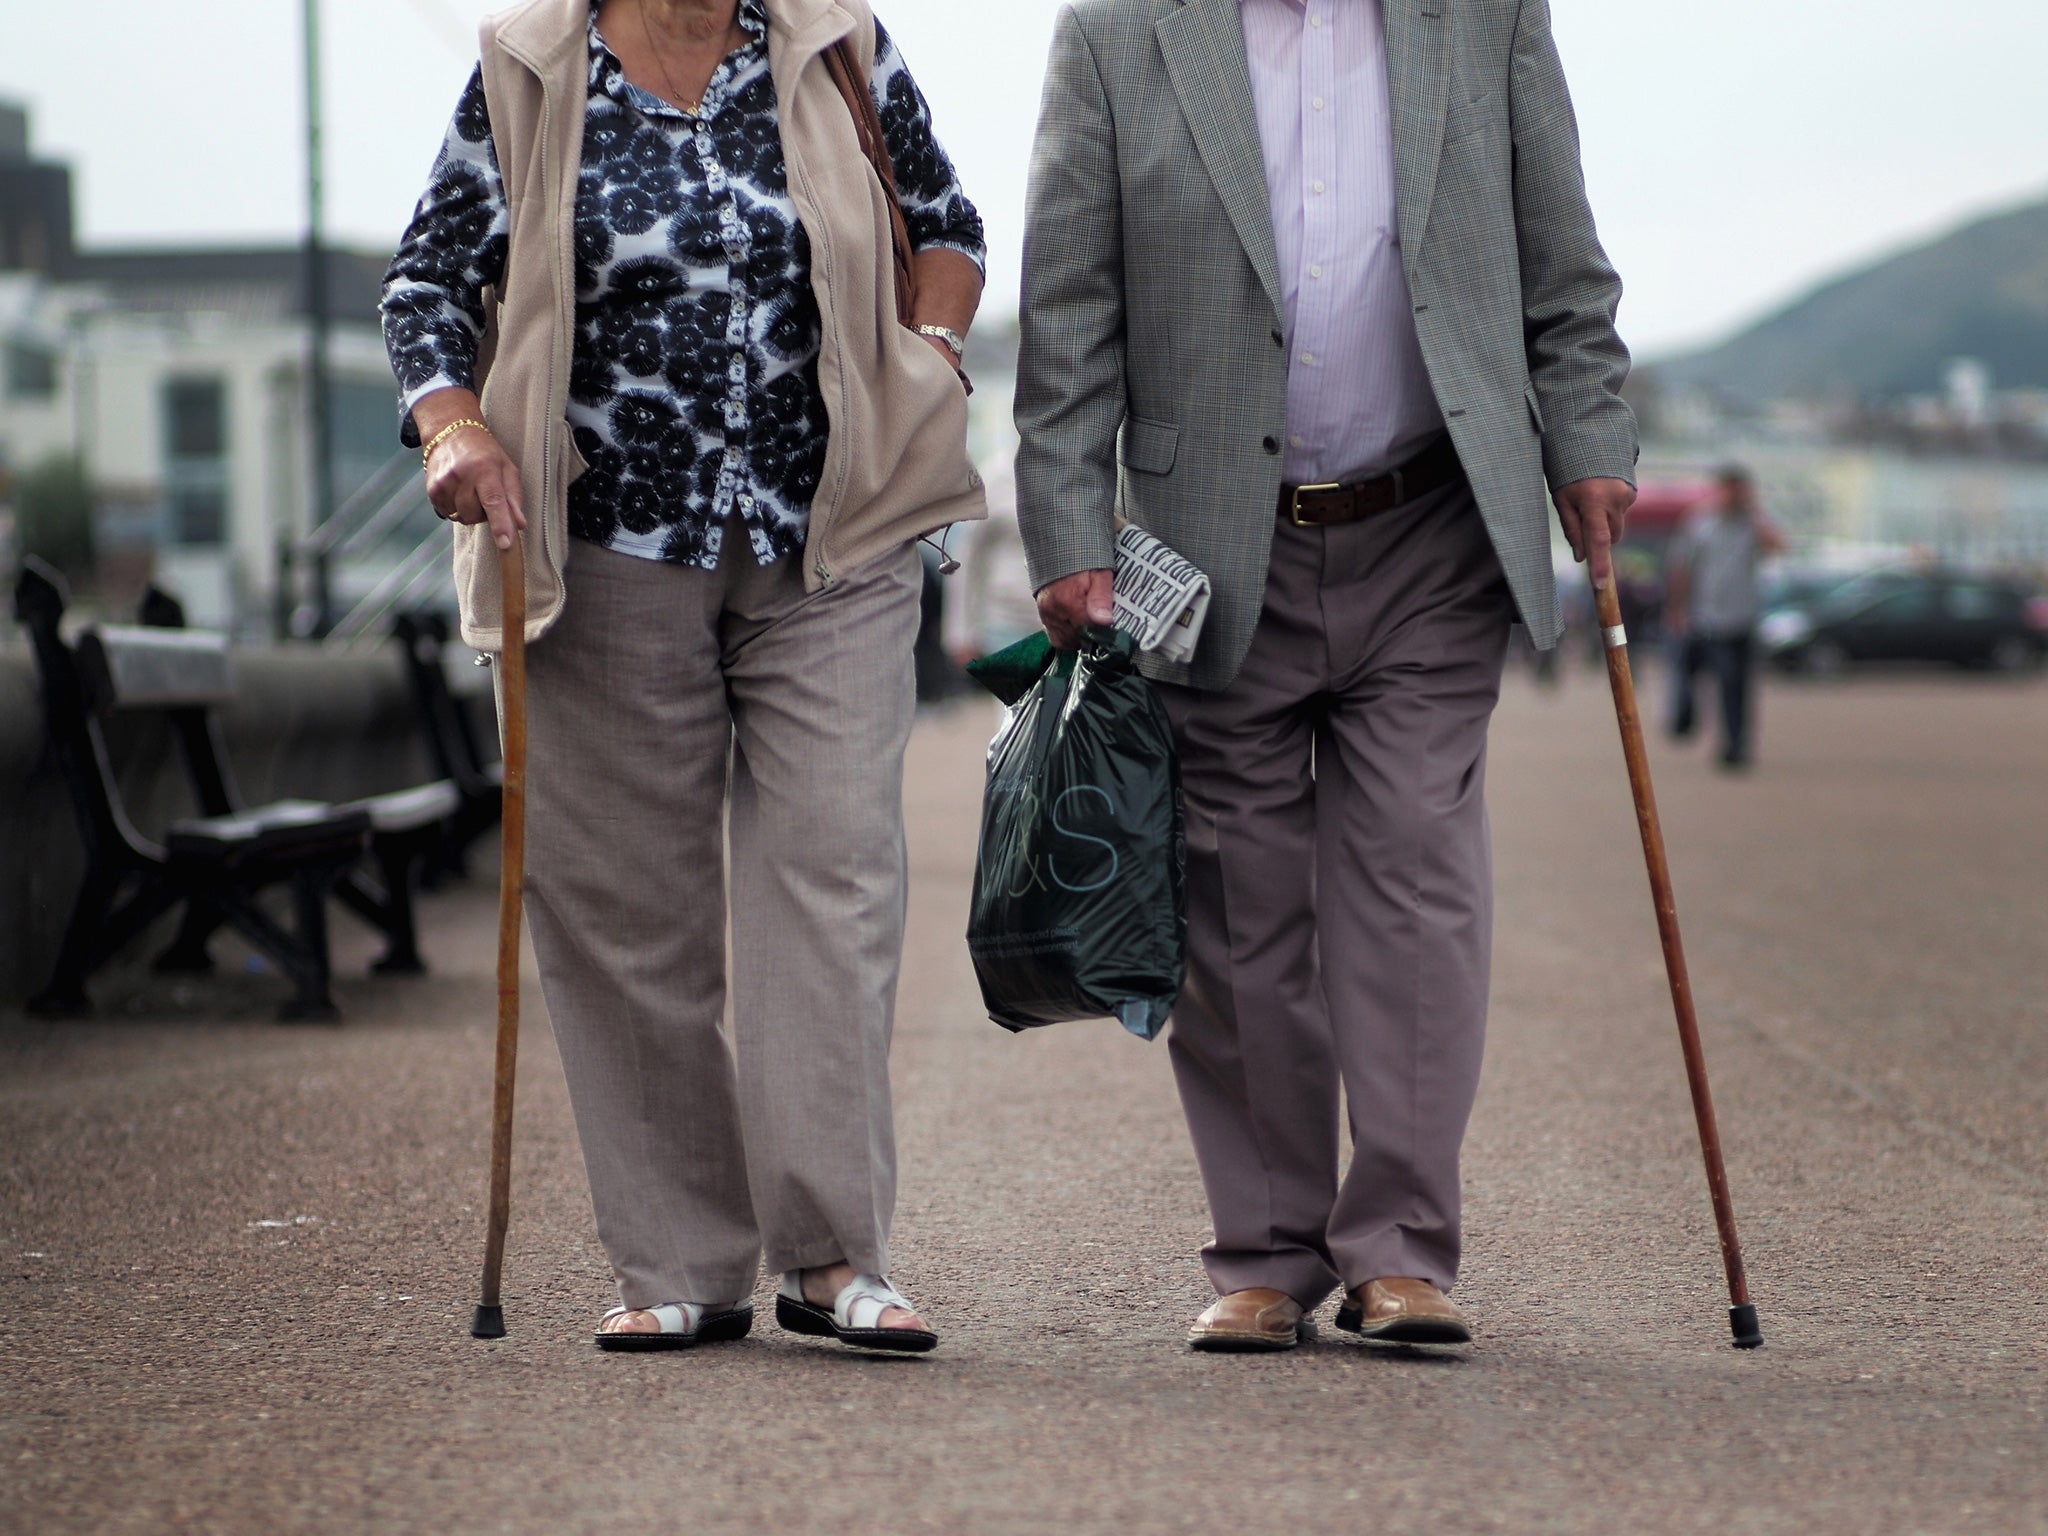 The new pension freedoms come into effect today, but what do they mean?